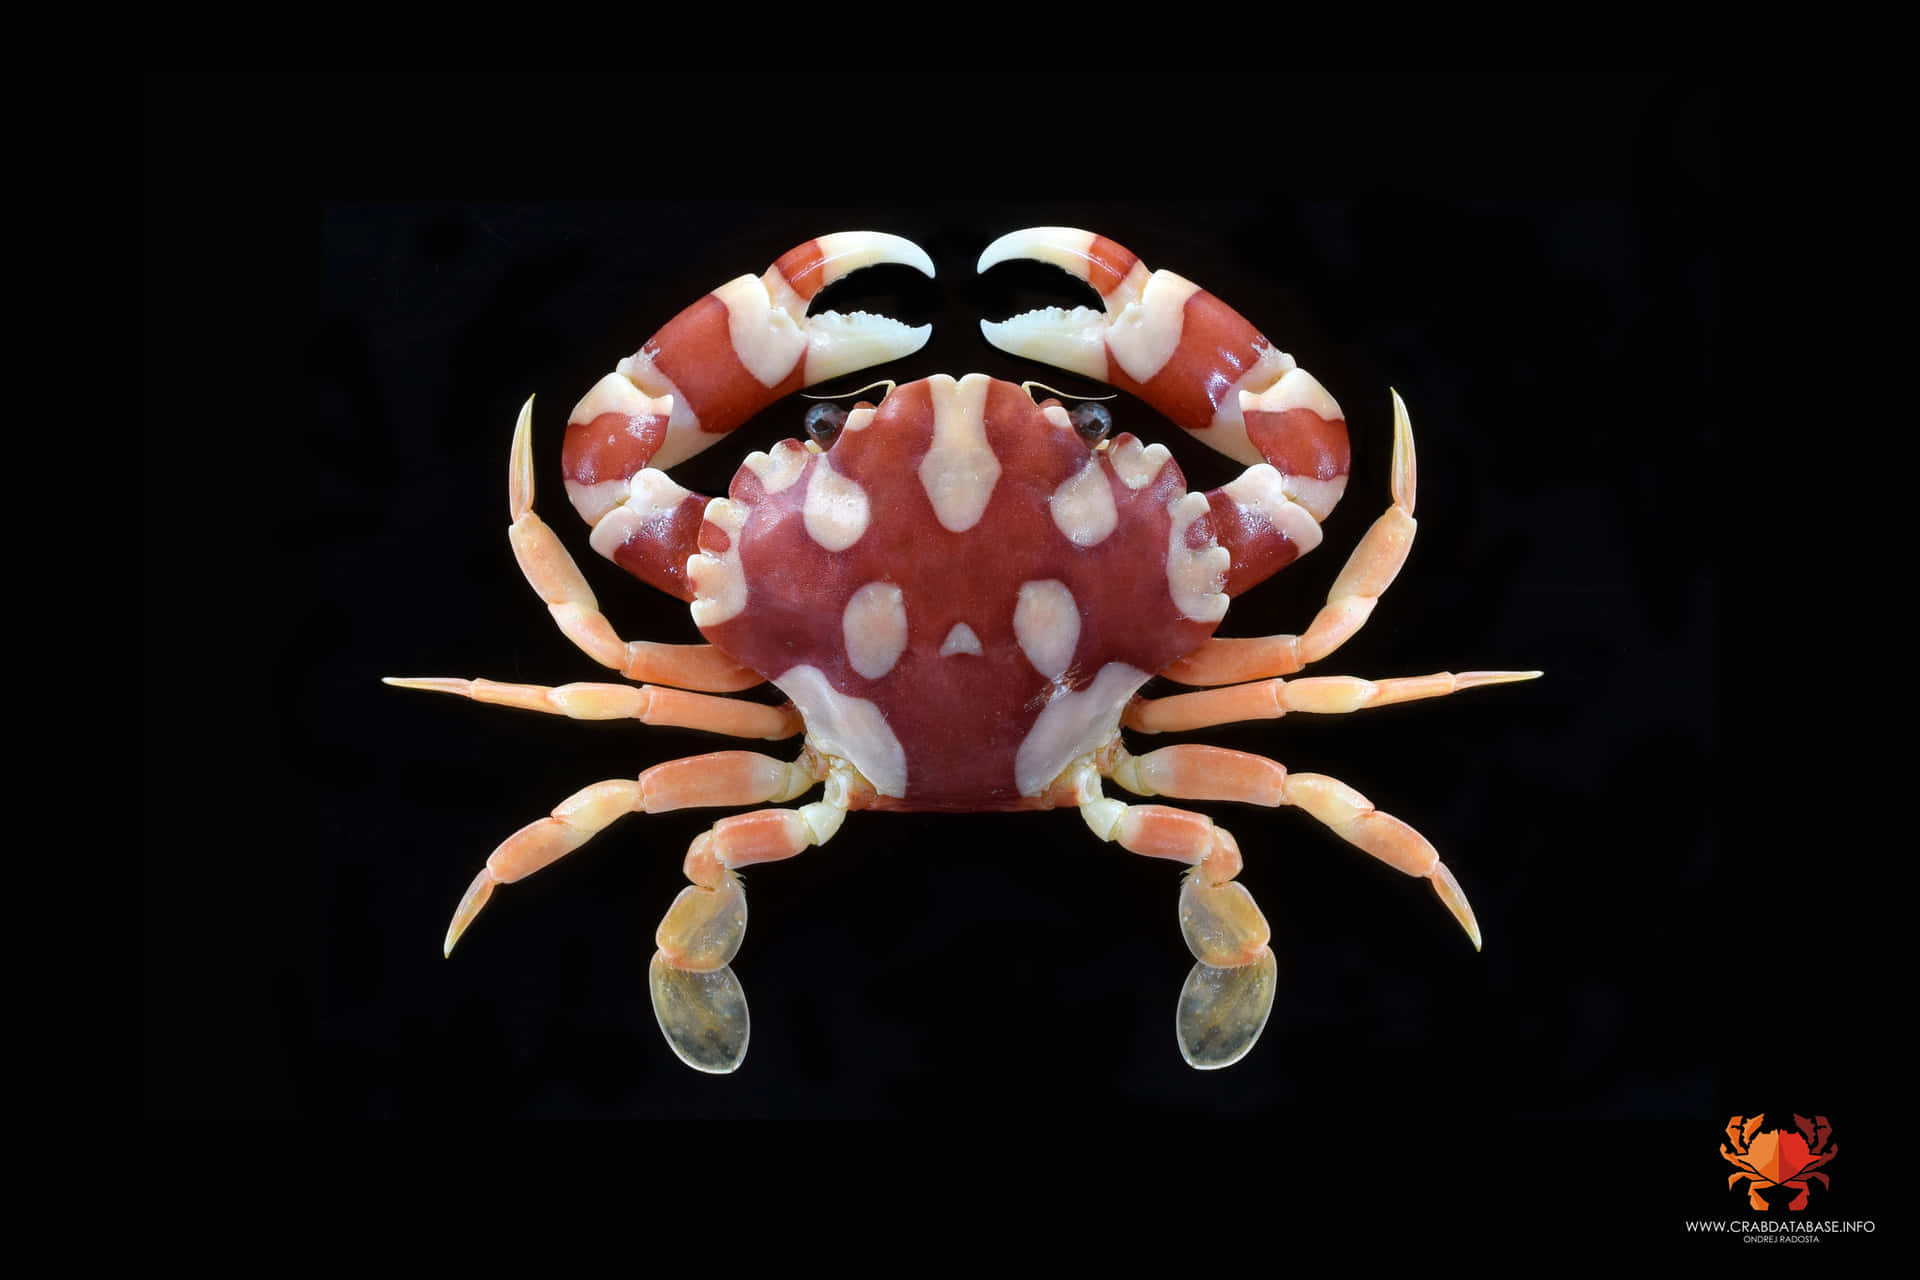 Majestic Side View Of A Vibrant Crab